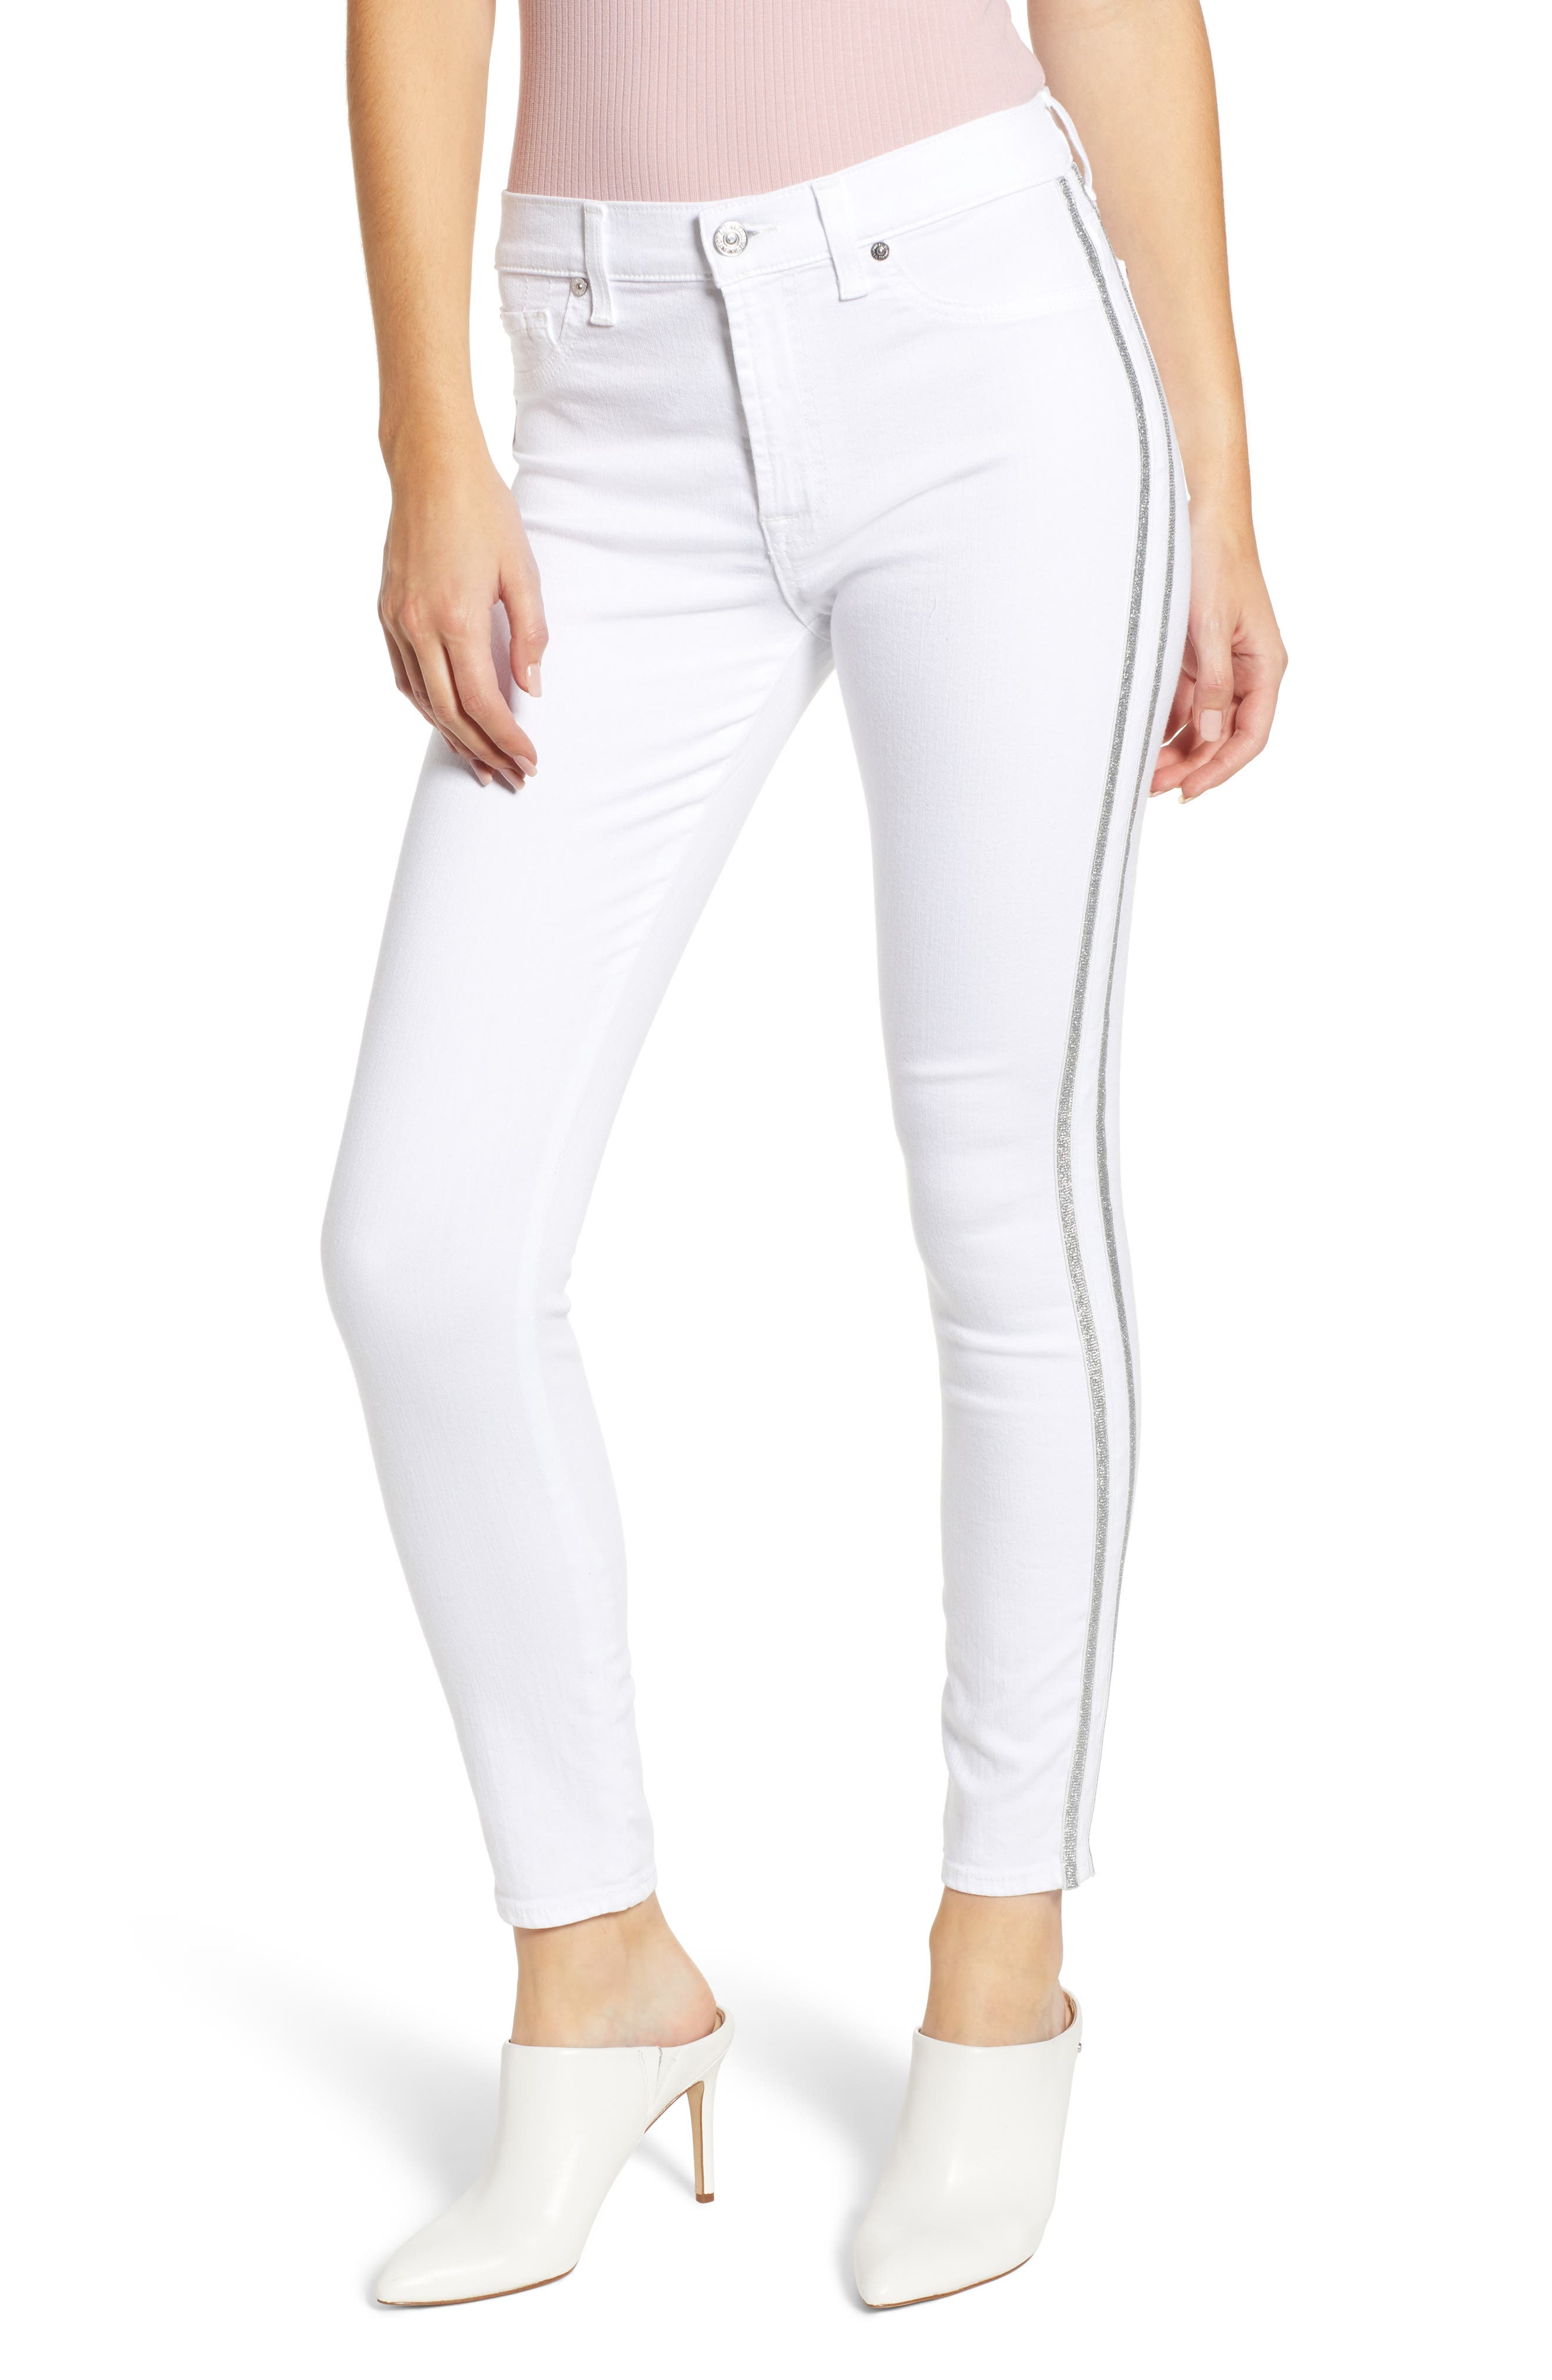 seven for all mankind white jeans